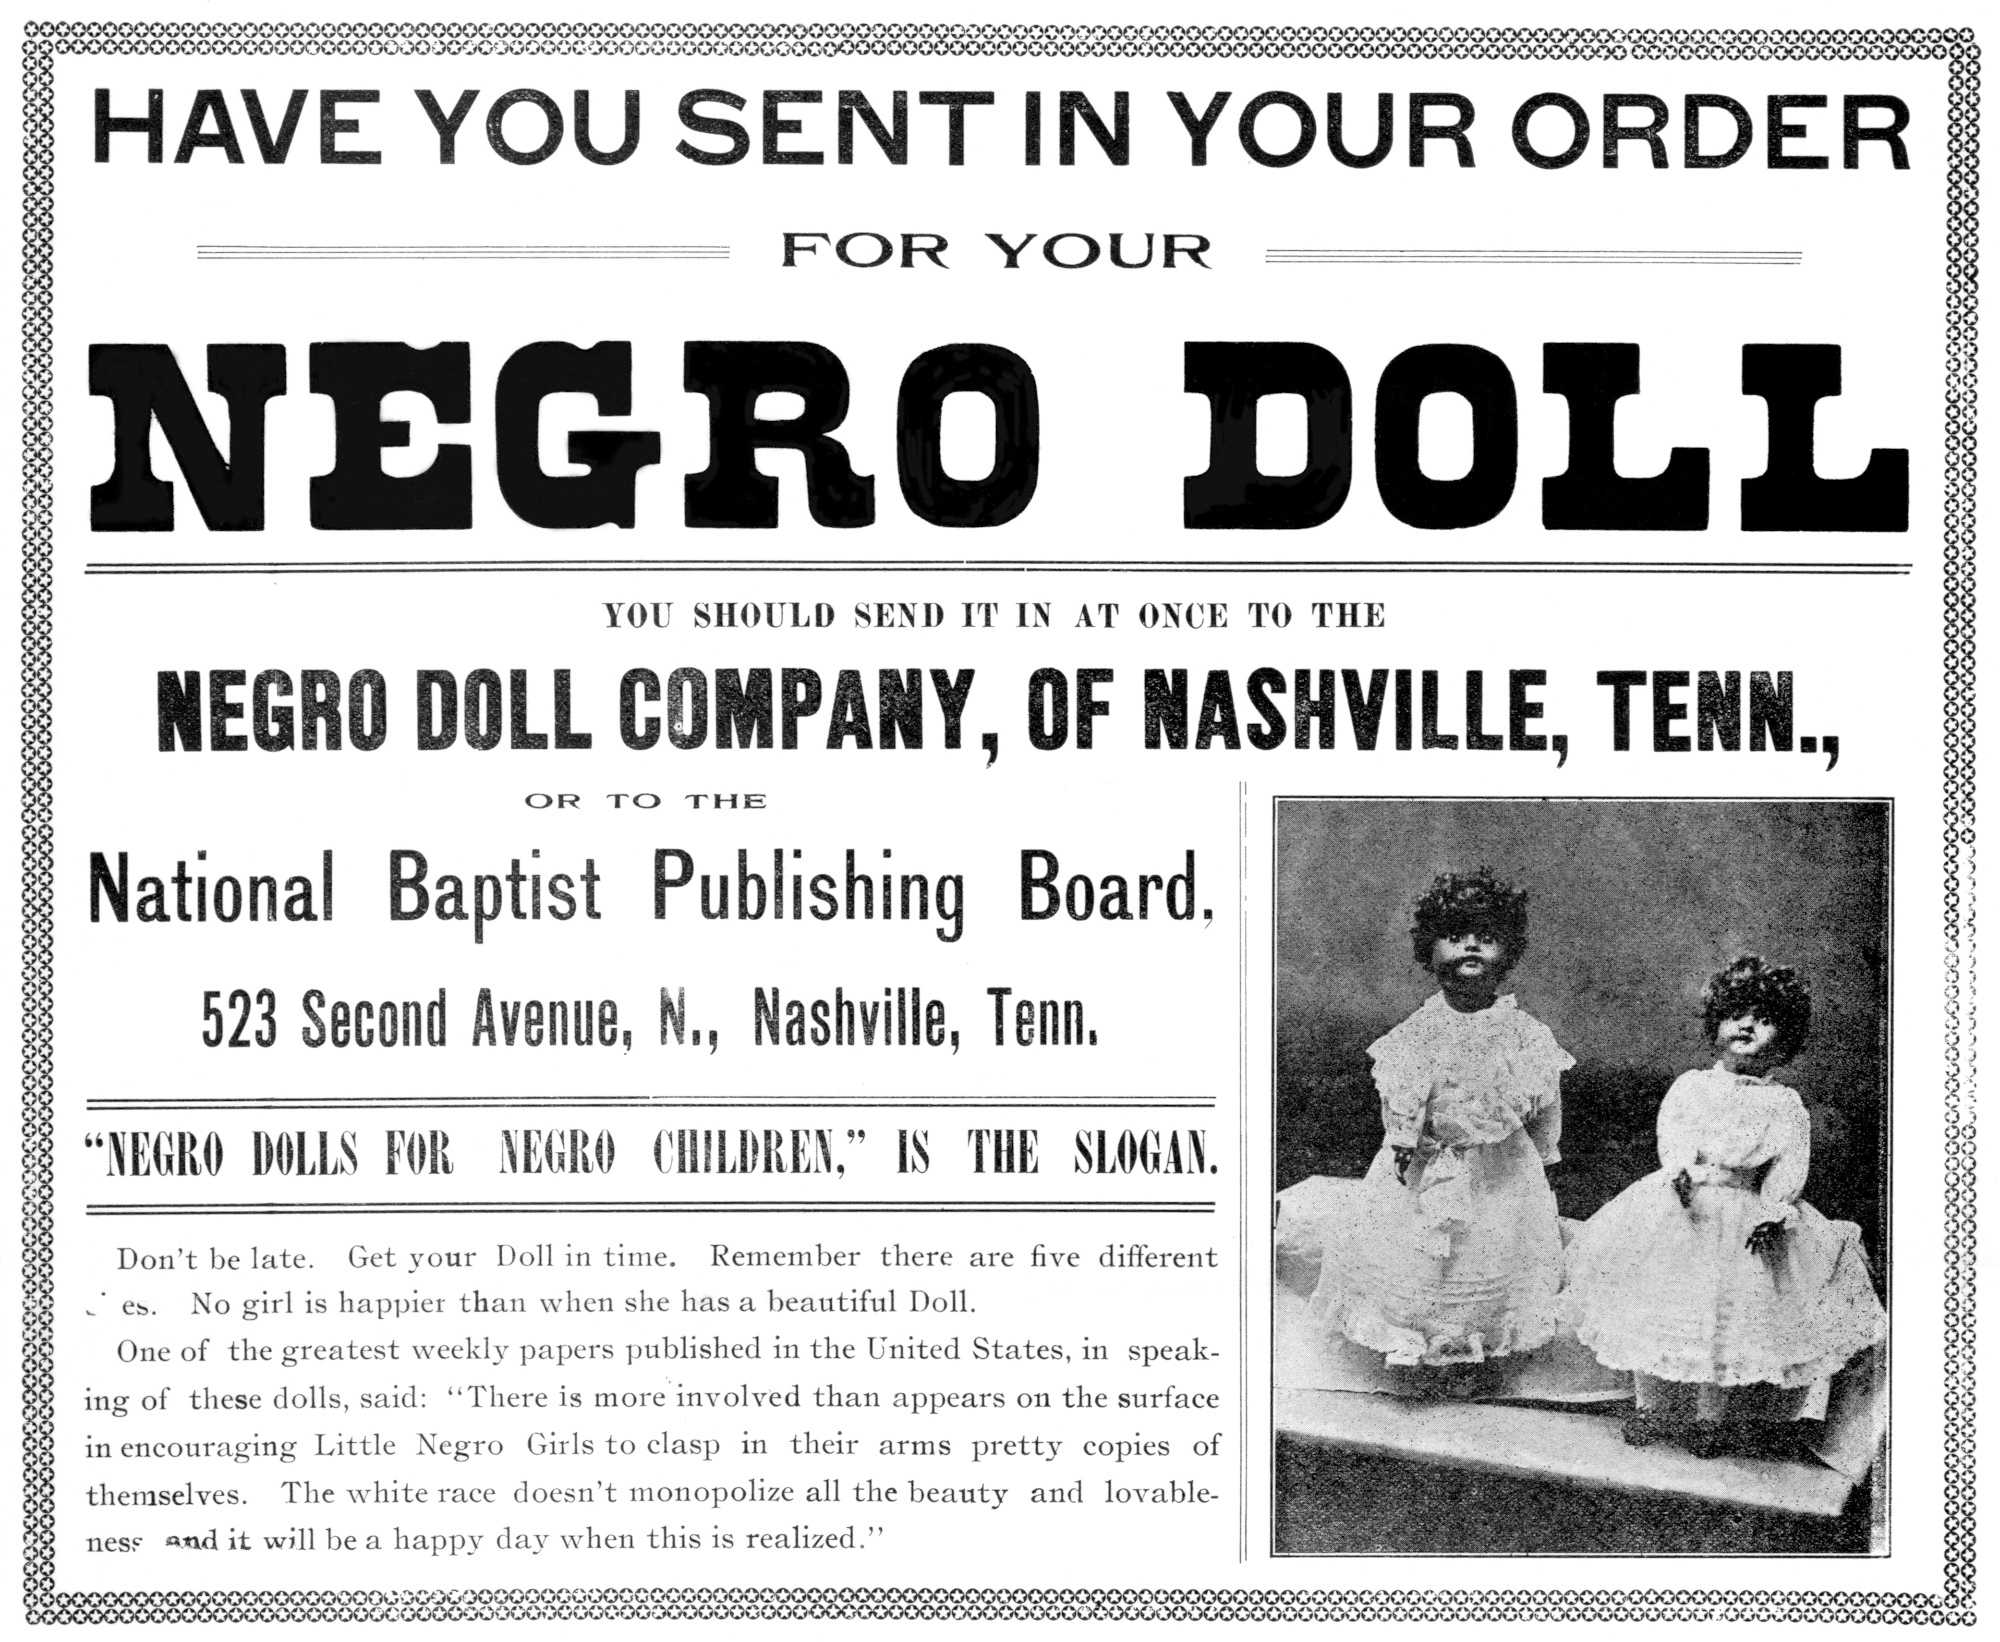 Image of an advertisement for Negro Doll Company